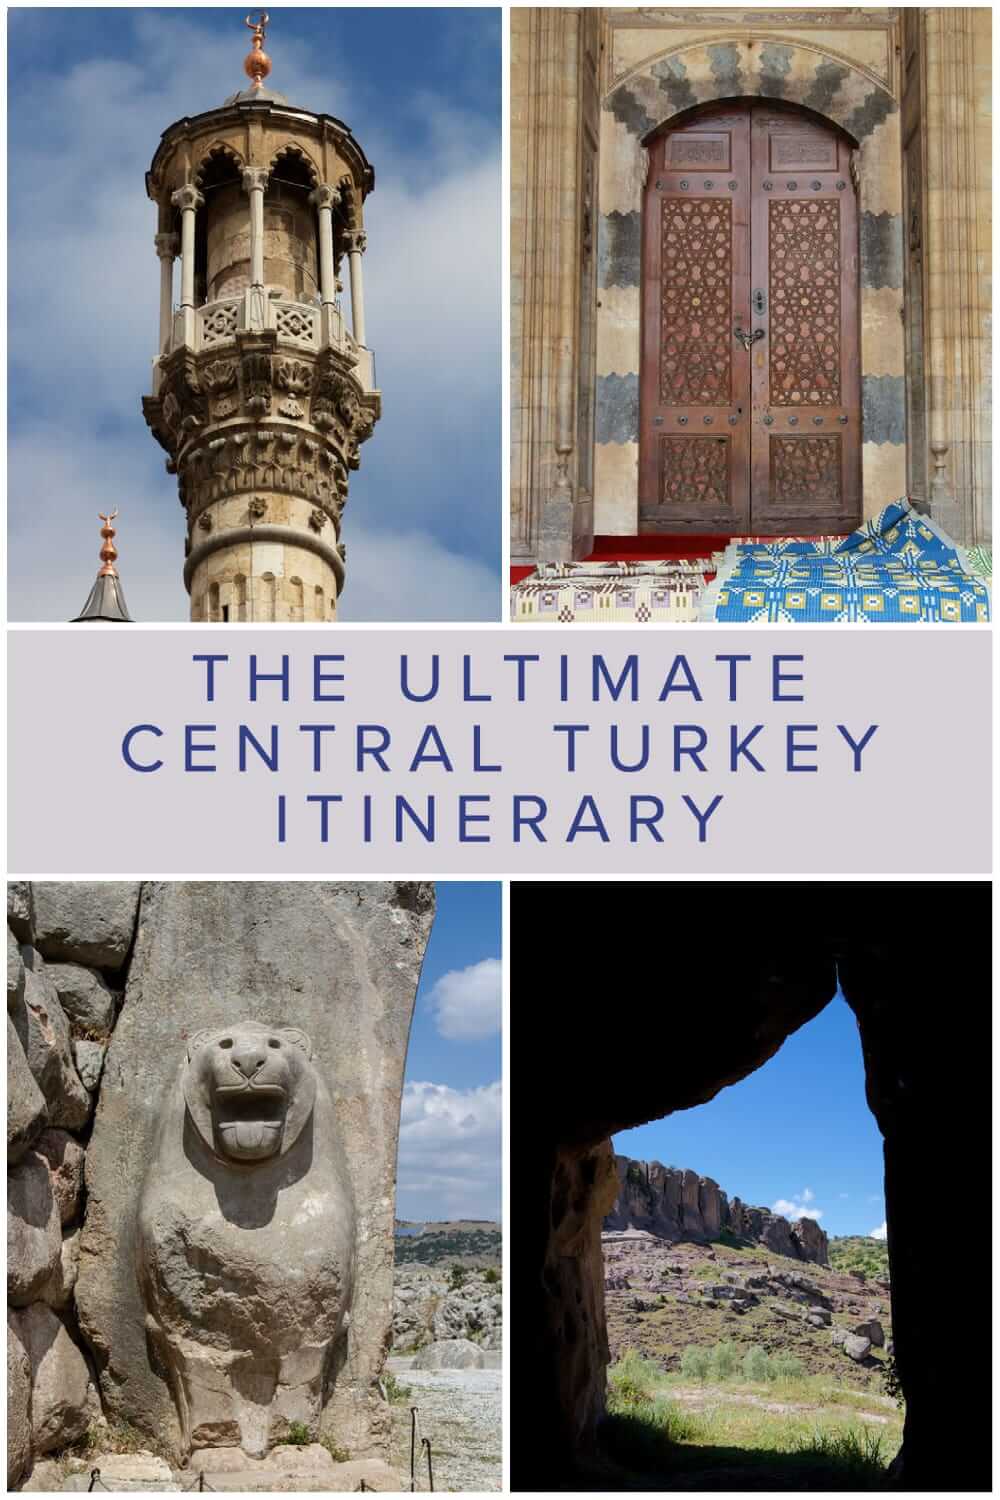 Central Turkey itinerary from for backpackers and independent travellers #travel #travelplanning #europe